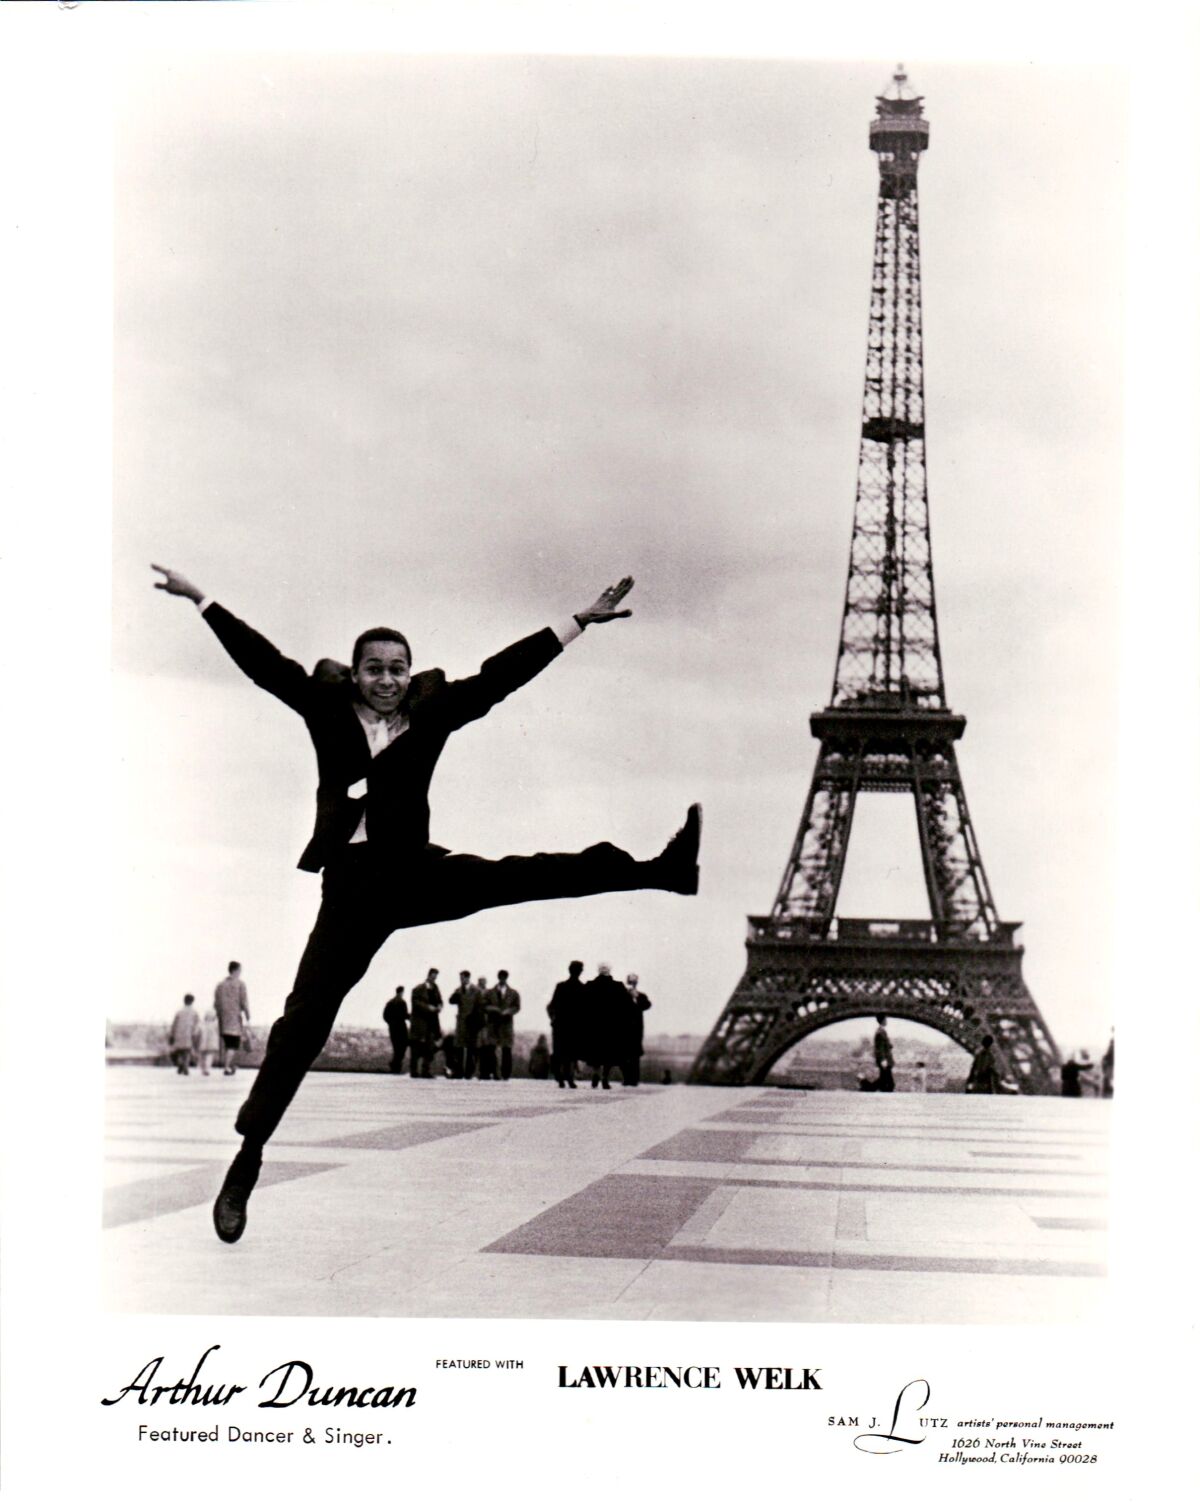 In an old publicity stunt, tap dancer Arthur Duncan is seen dancing enthusiastically in front of the Eiffel Tower 